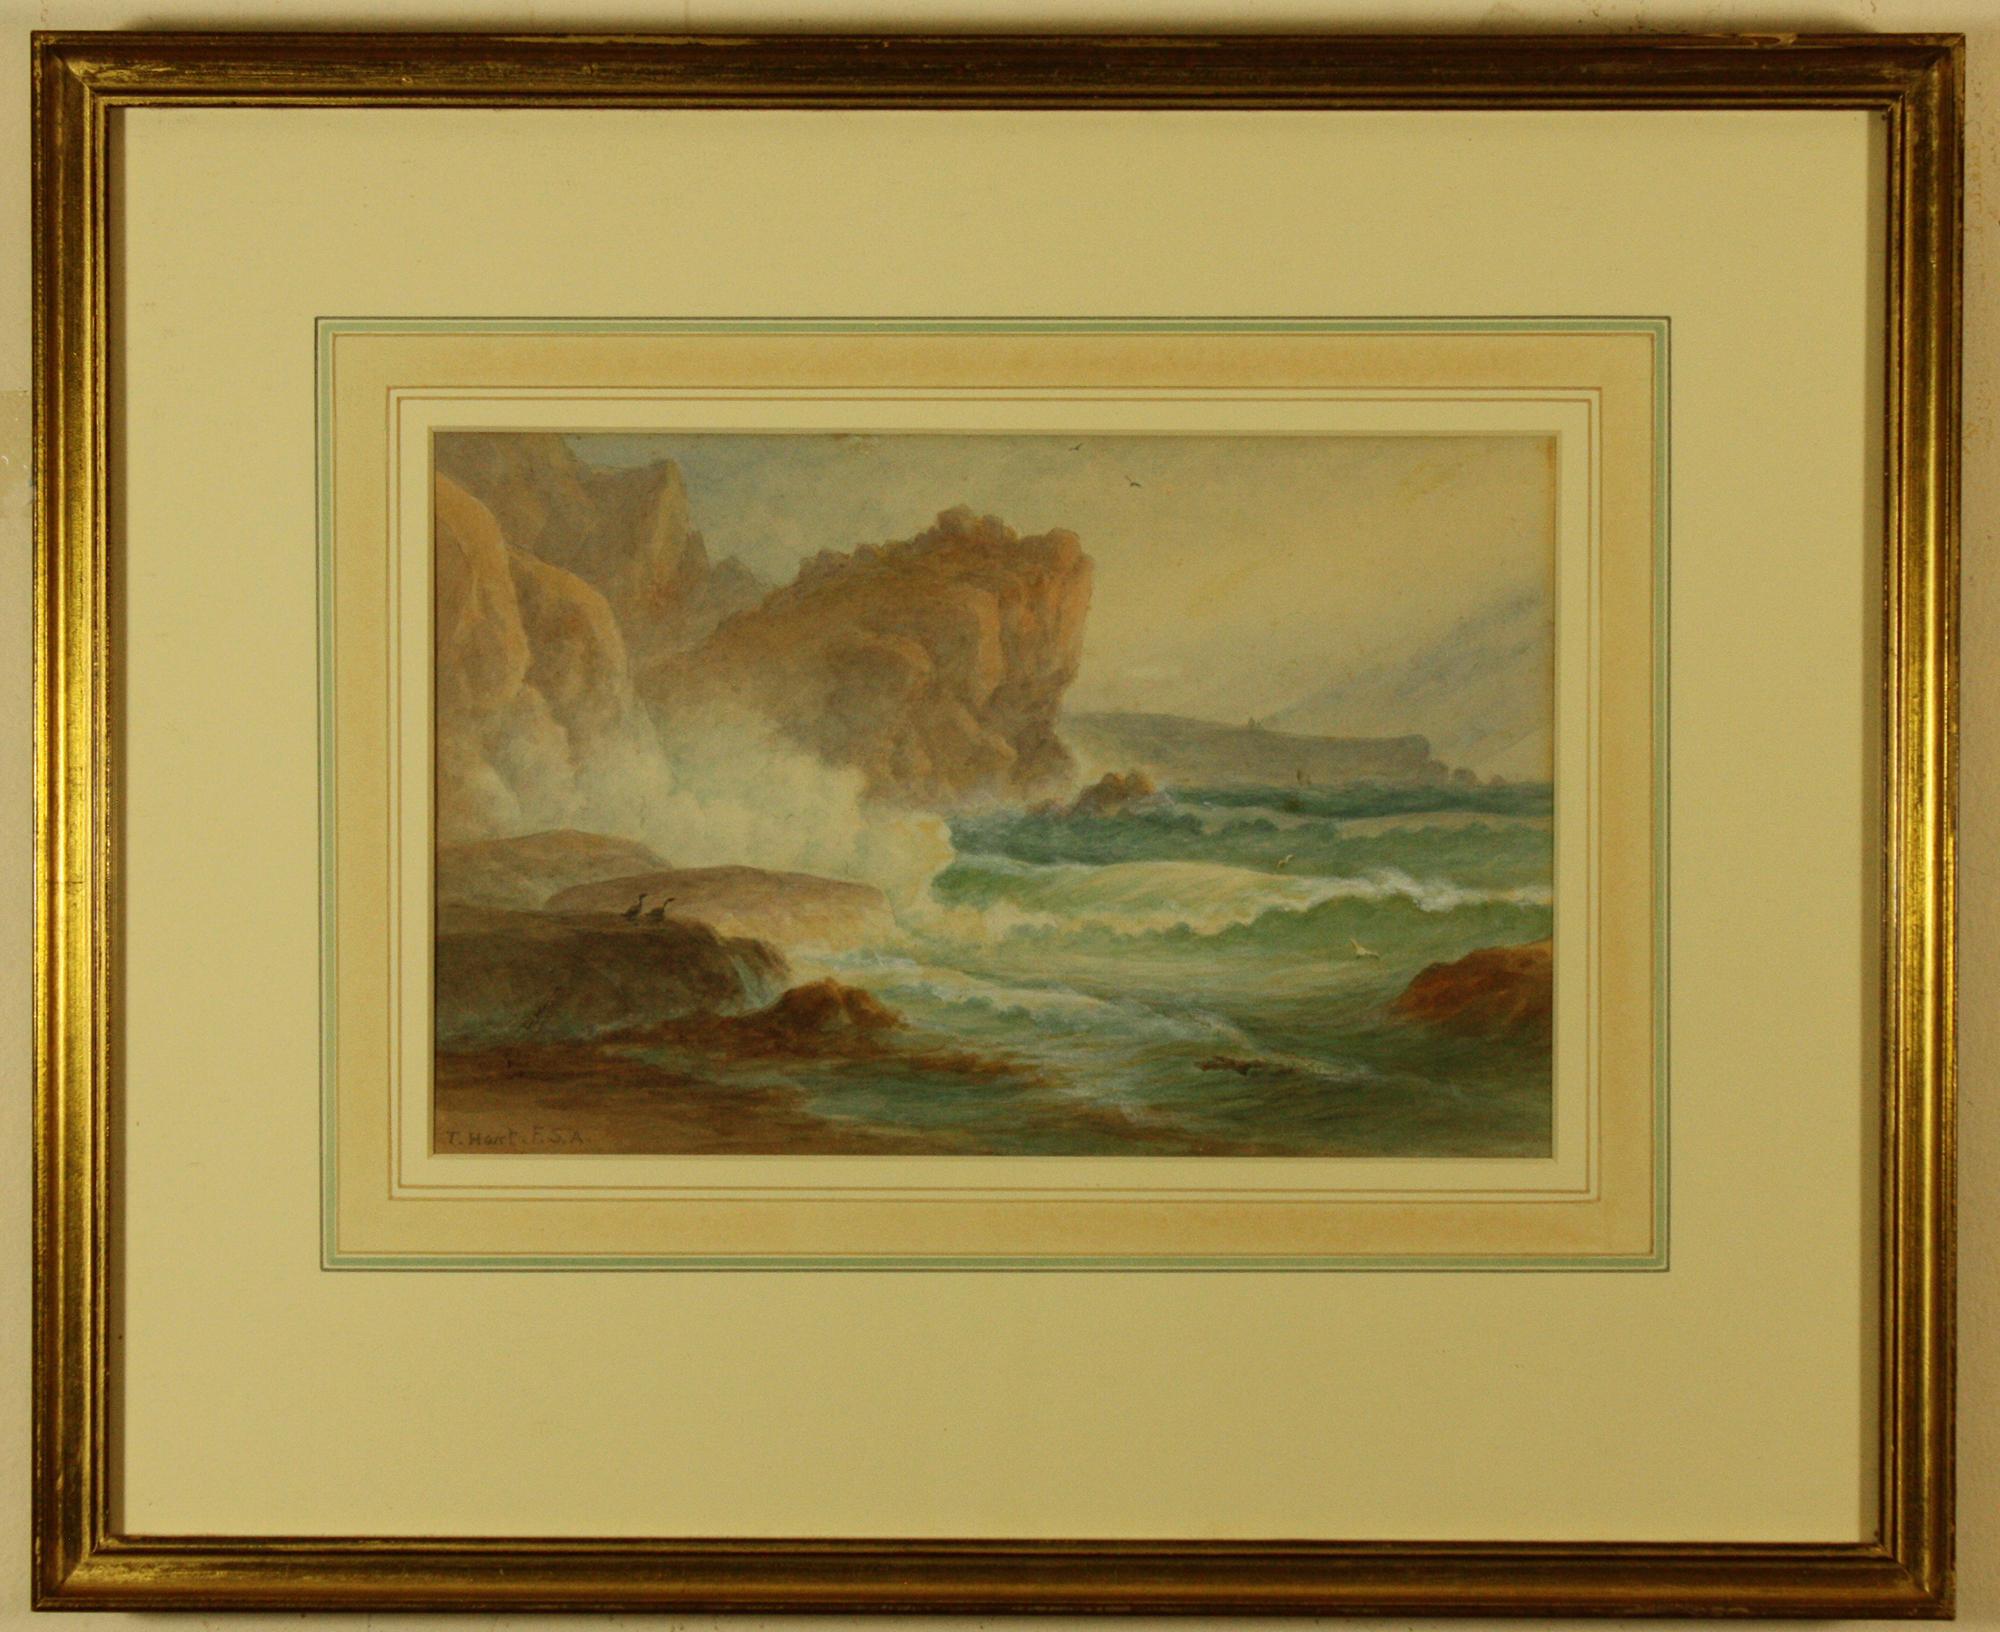 Lion Rock and the Lizard from Kynance Cove by Thomas Hart FSA
Watercolour
Image Size  9.75 ins by 6.25 ins
Overall Frame Size  13.75 ins by 16.75 ins

Thomas Hart 
Born 1830 Crowan Cornwall, Died 1916 The Lizard, Cornwall
Thomas was a prolific